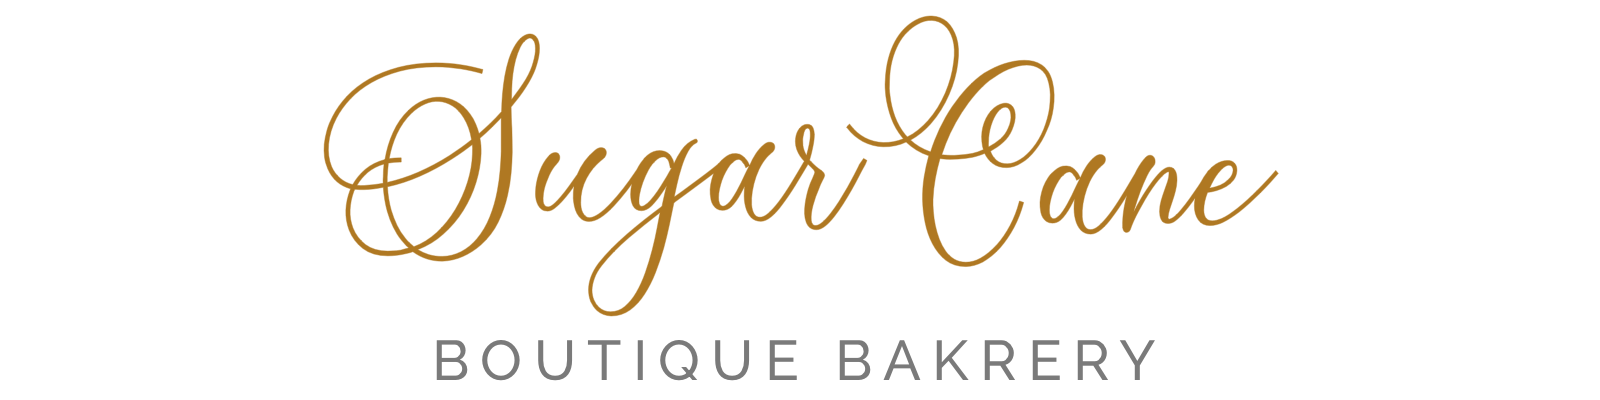 Front Page - Sugar Cane Bakery